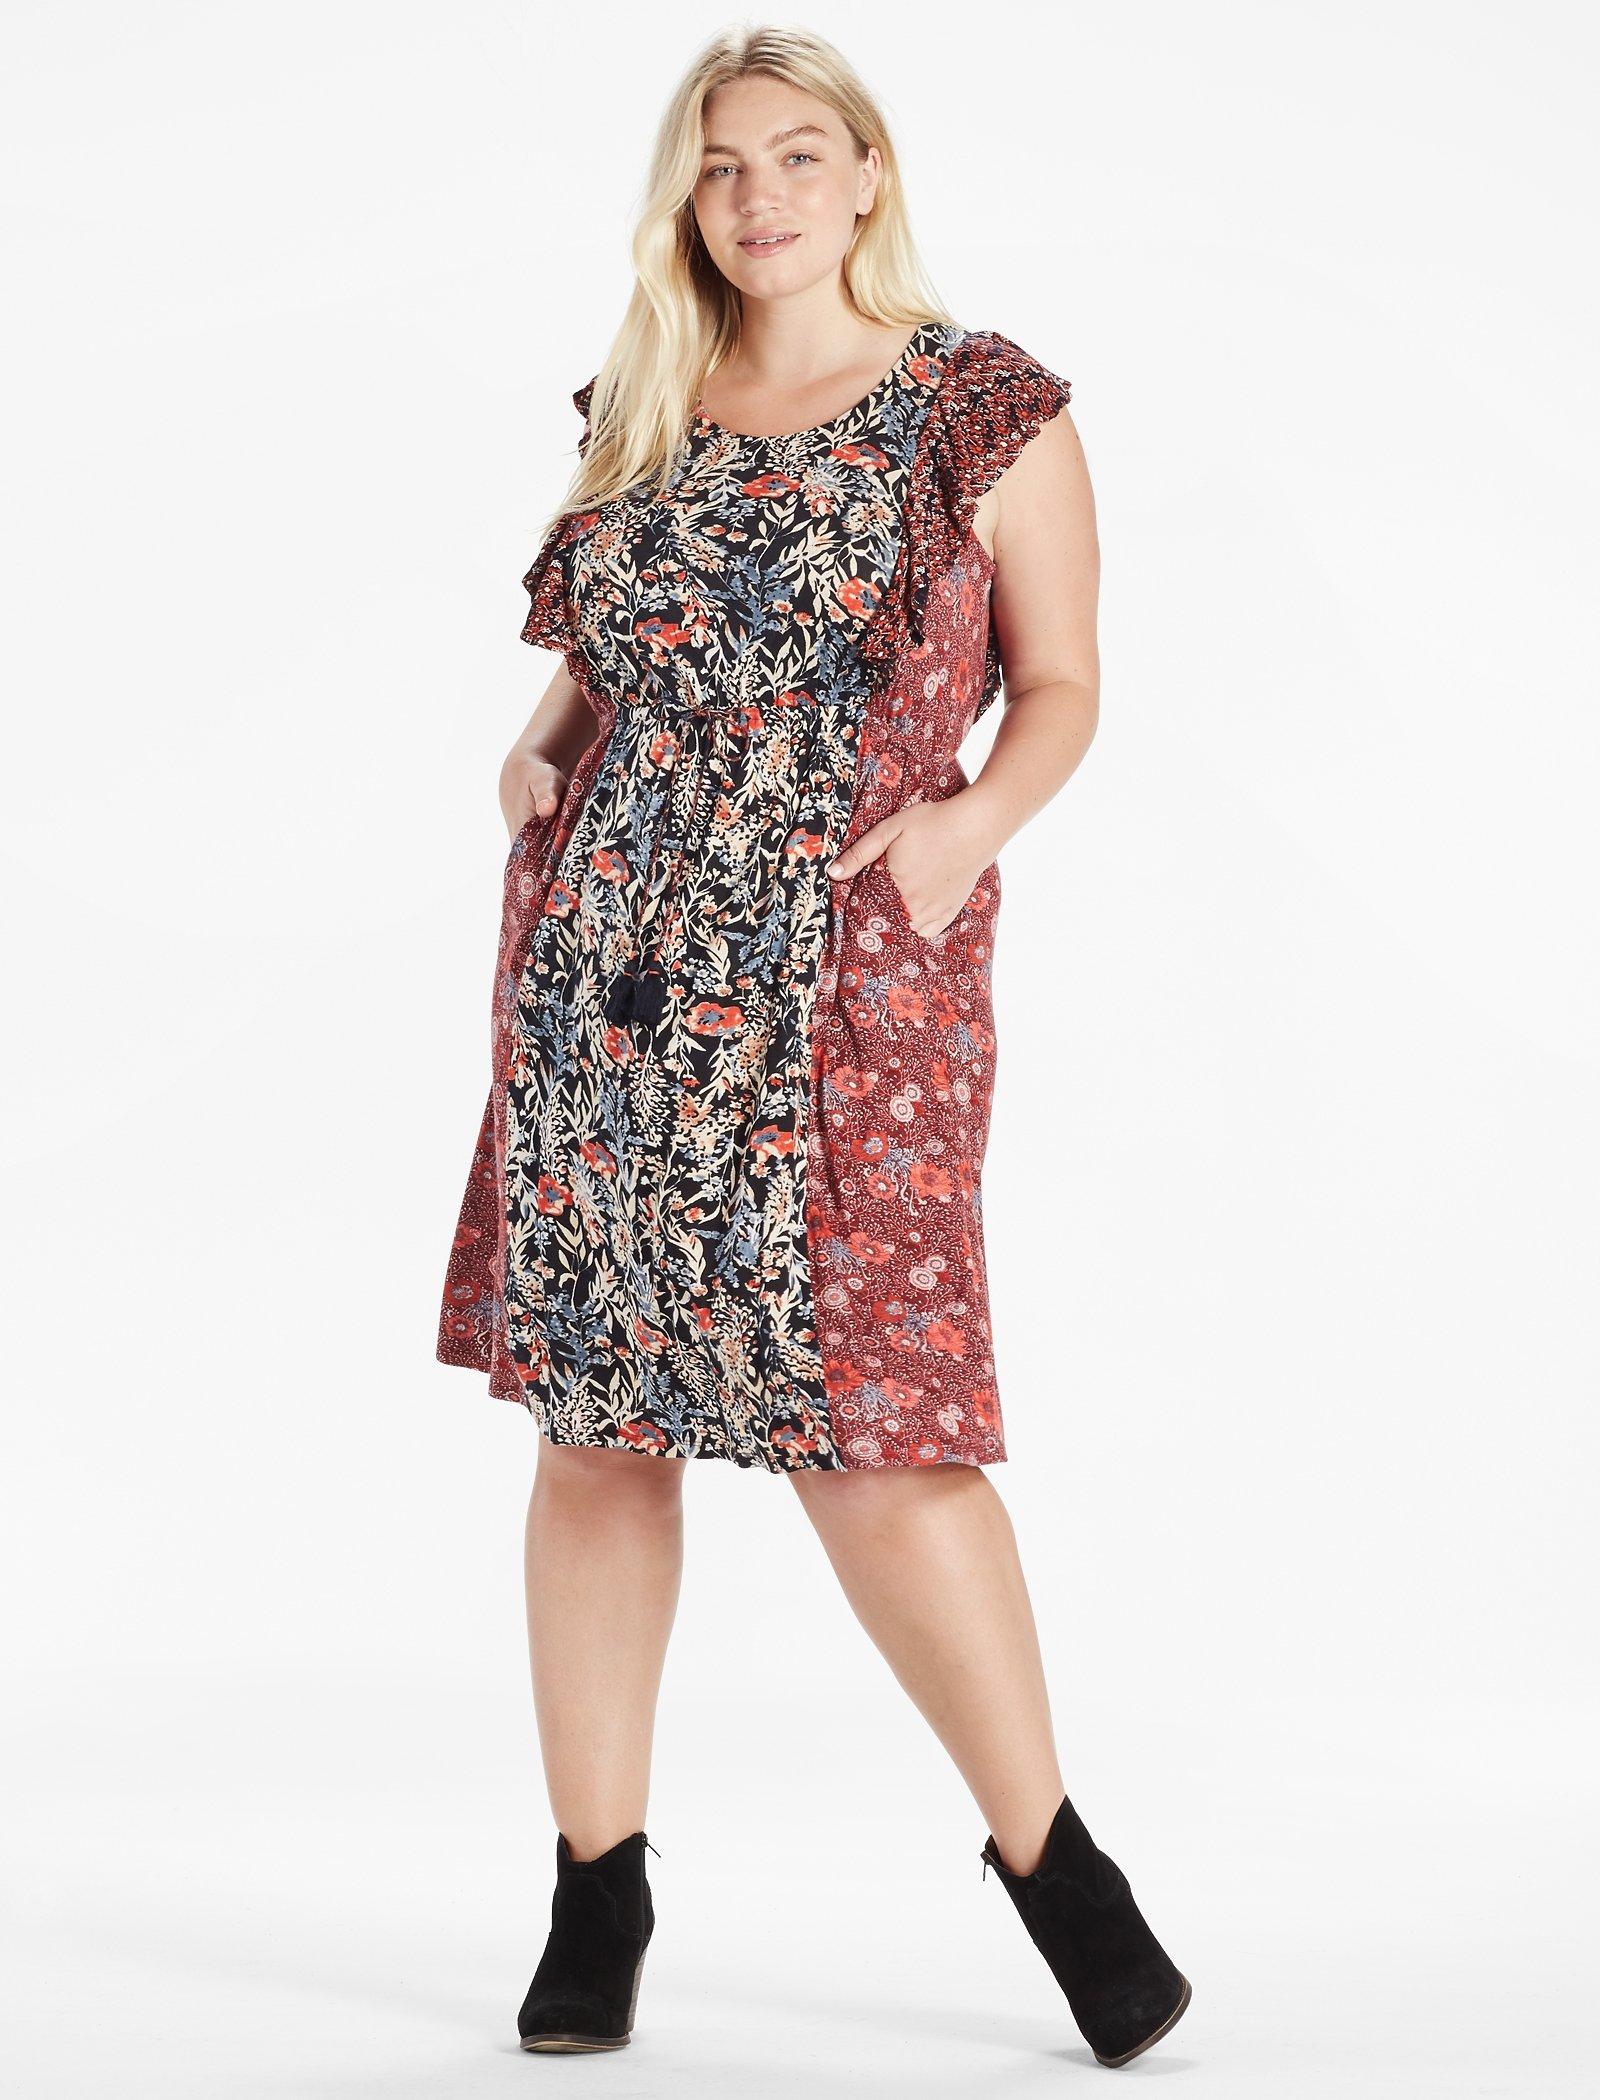 Plus Size Women's Clothing | Lucky Brand